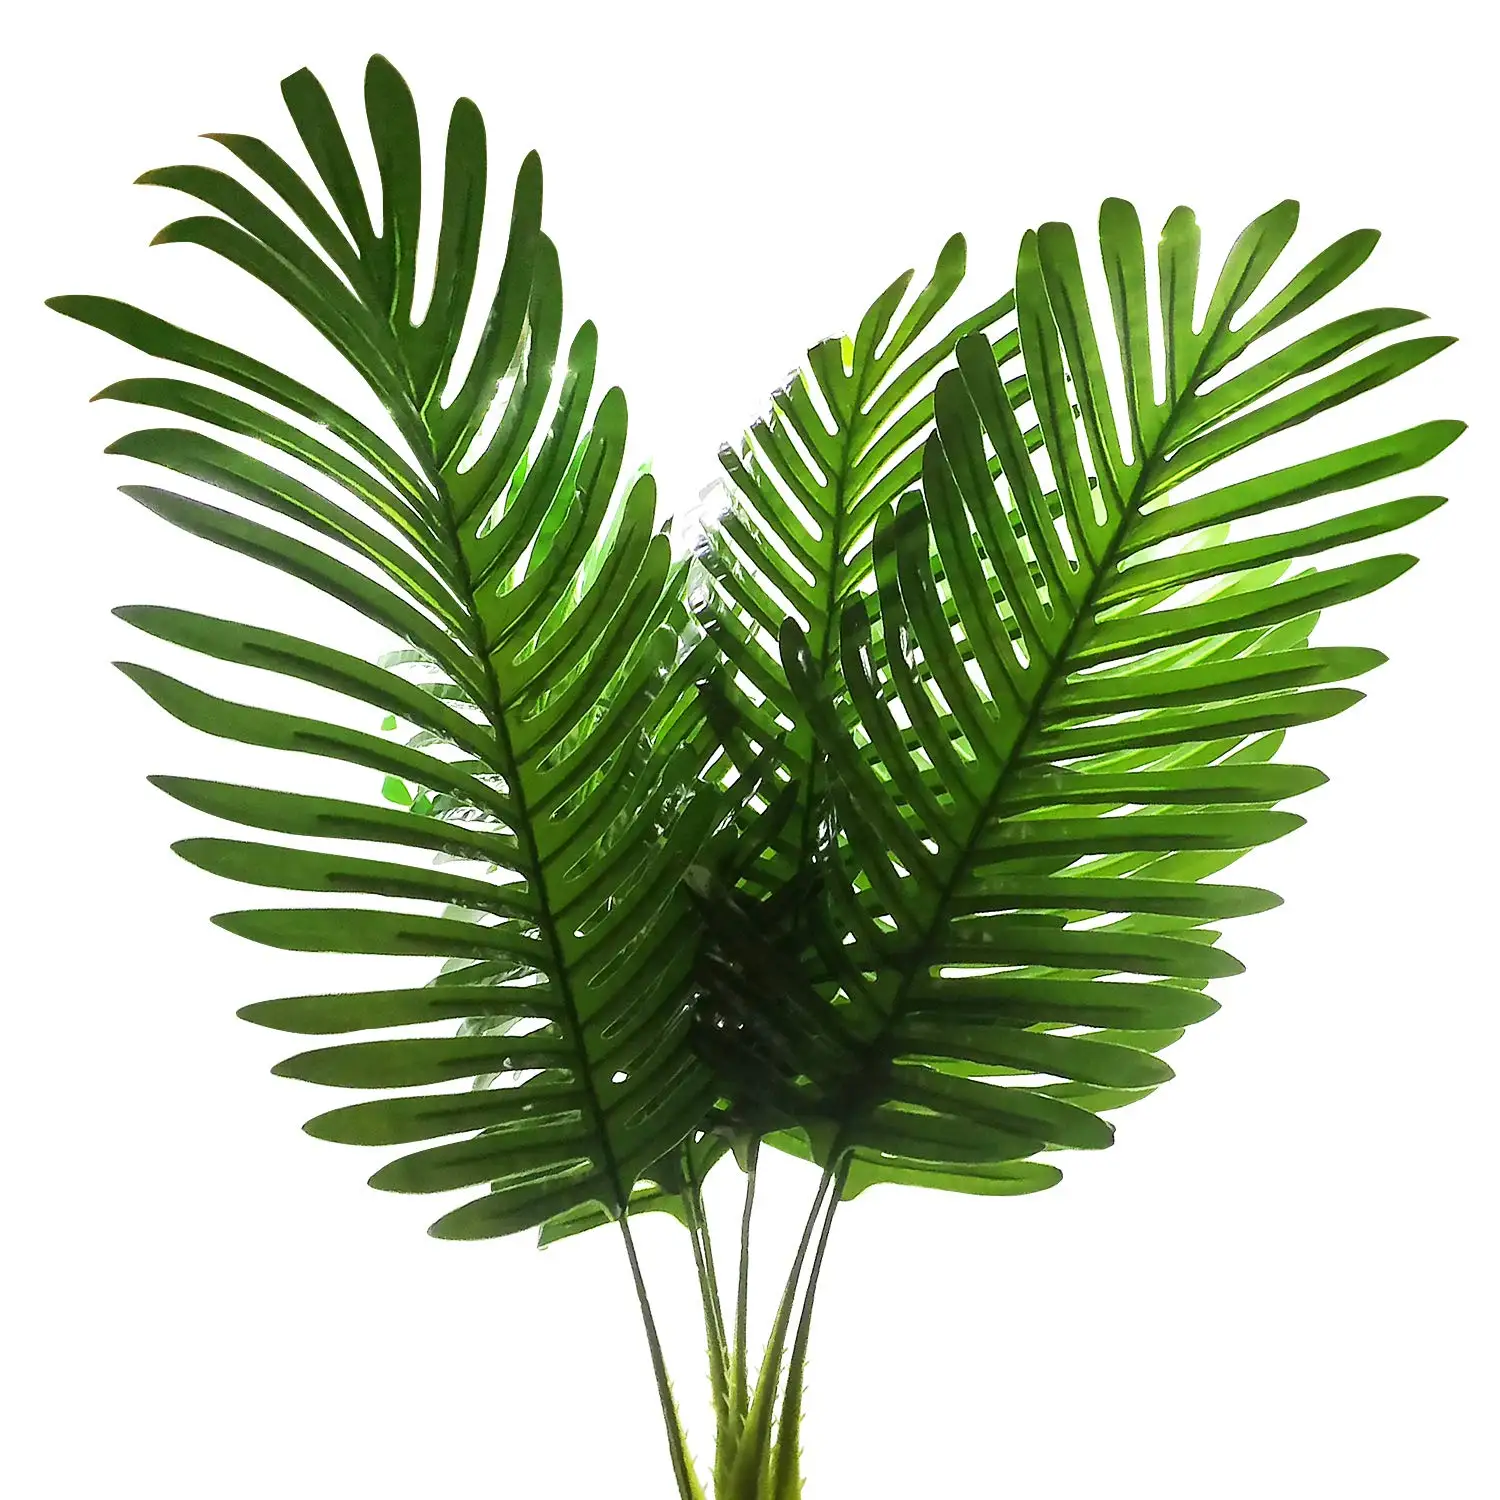 

METABLE 5 Pack Palm Artificial Plants Leaves decorations faux large Tropical Palm Leaves Imitation Ferns Artificial Plants Leave